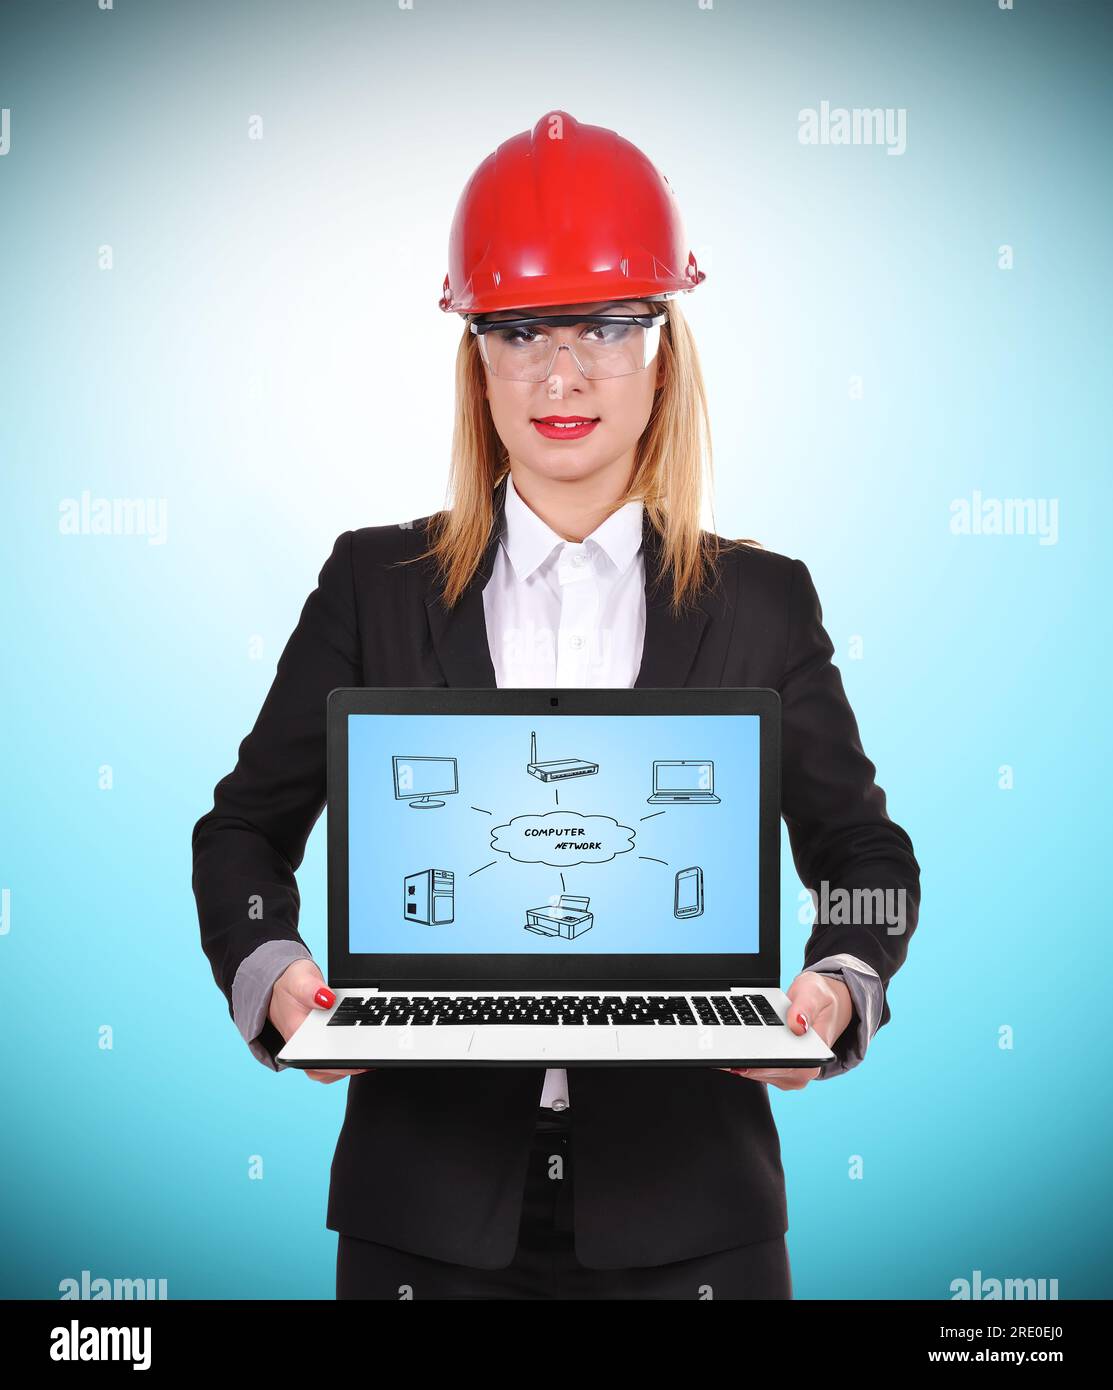 woman engineer holding laptop with computer network Stock Photo